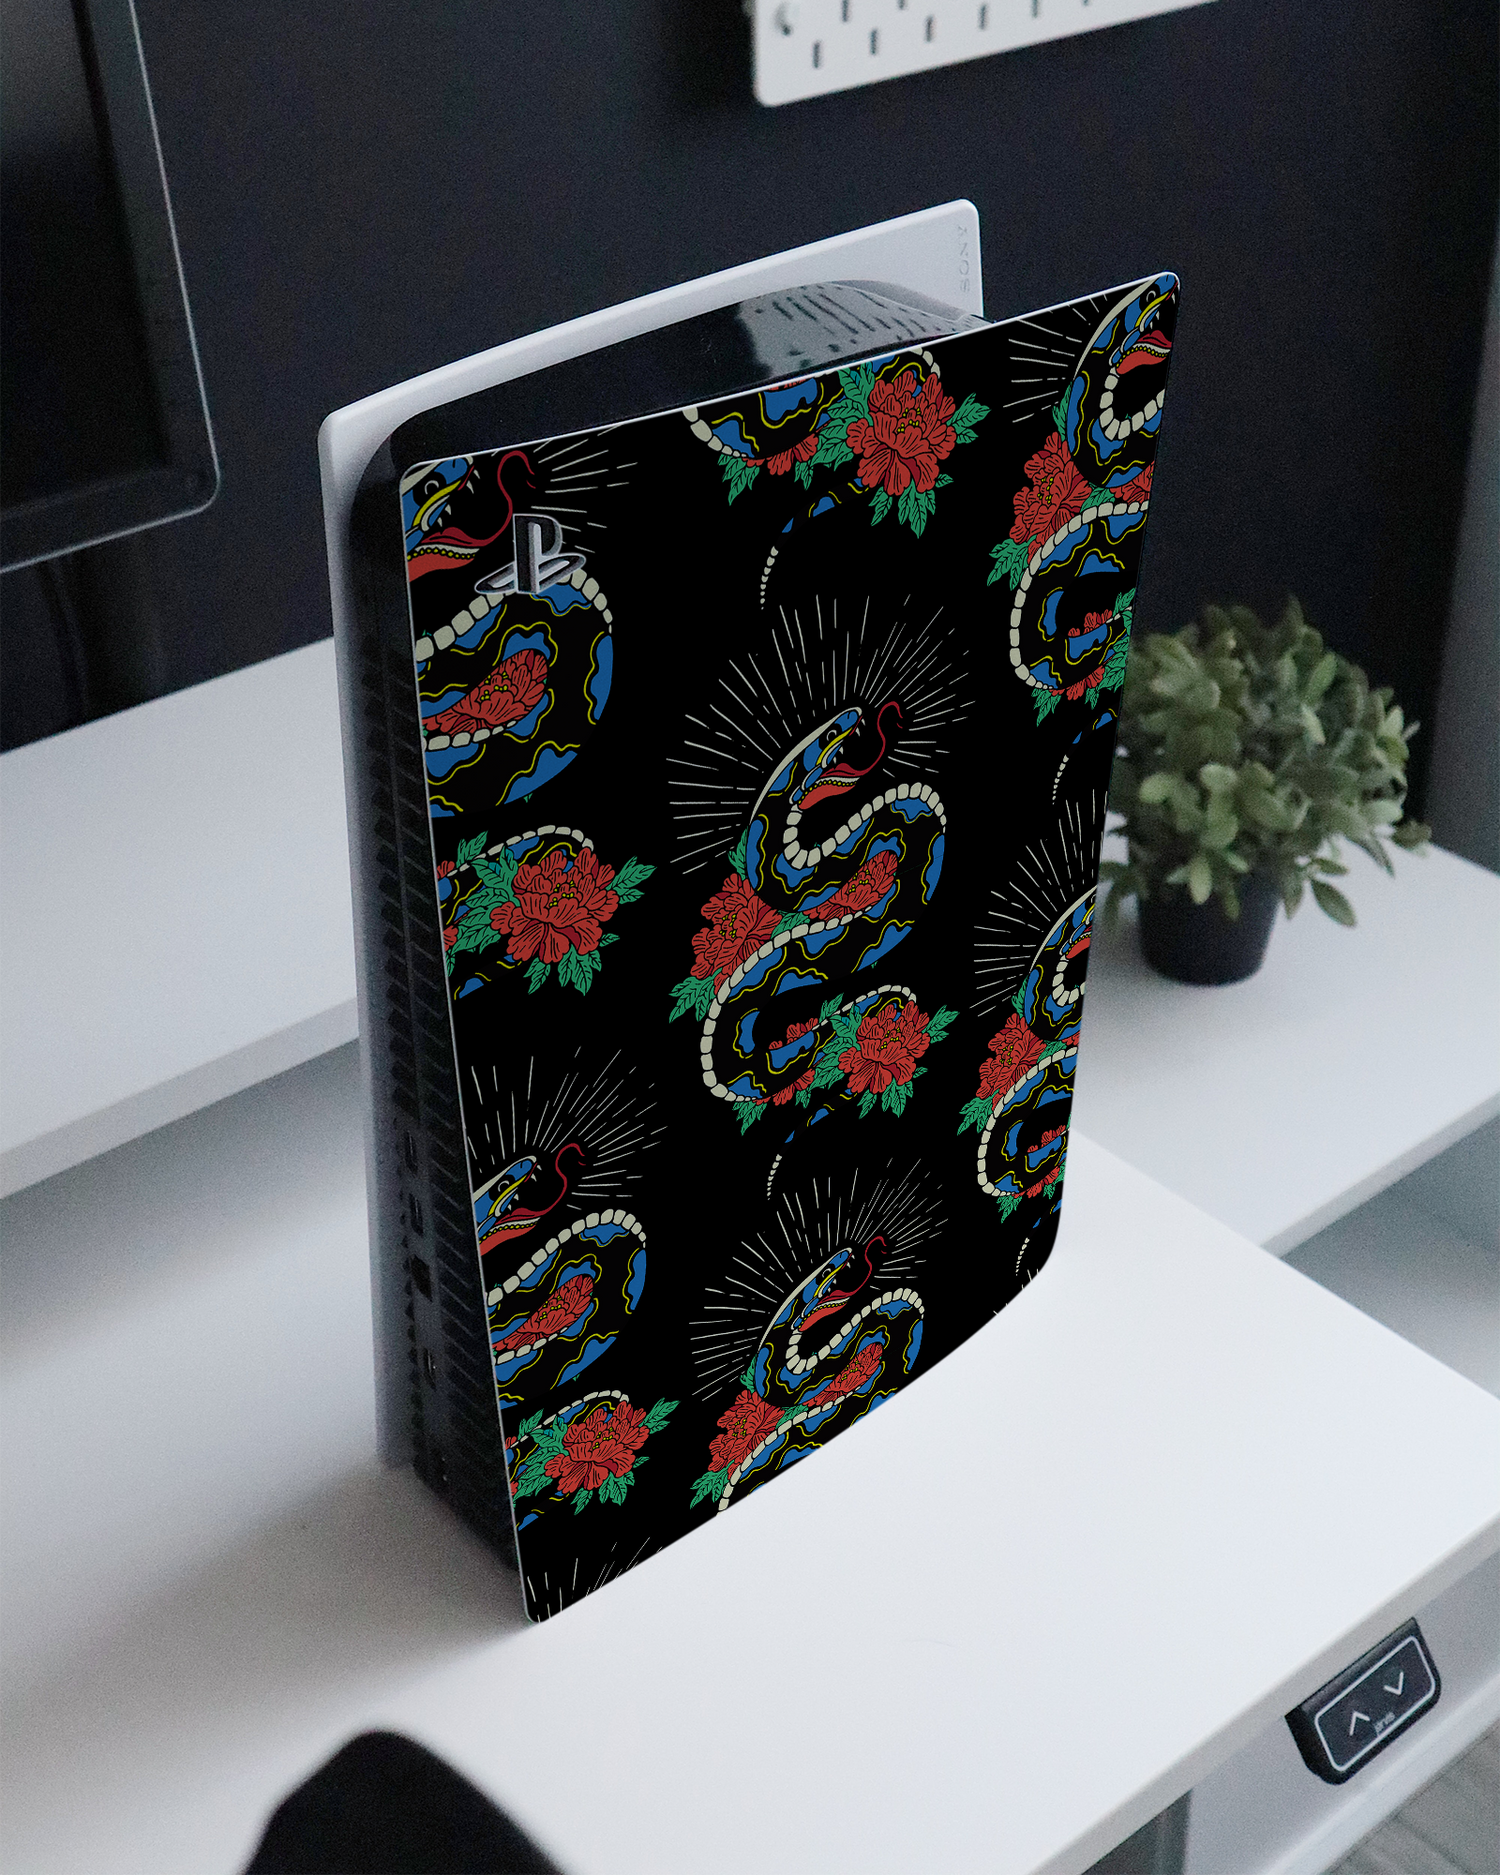 Repeating Snakes 2 Console Skin for Sony PlayStation 5 Digital Edition standing on a sideboard 